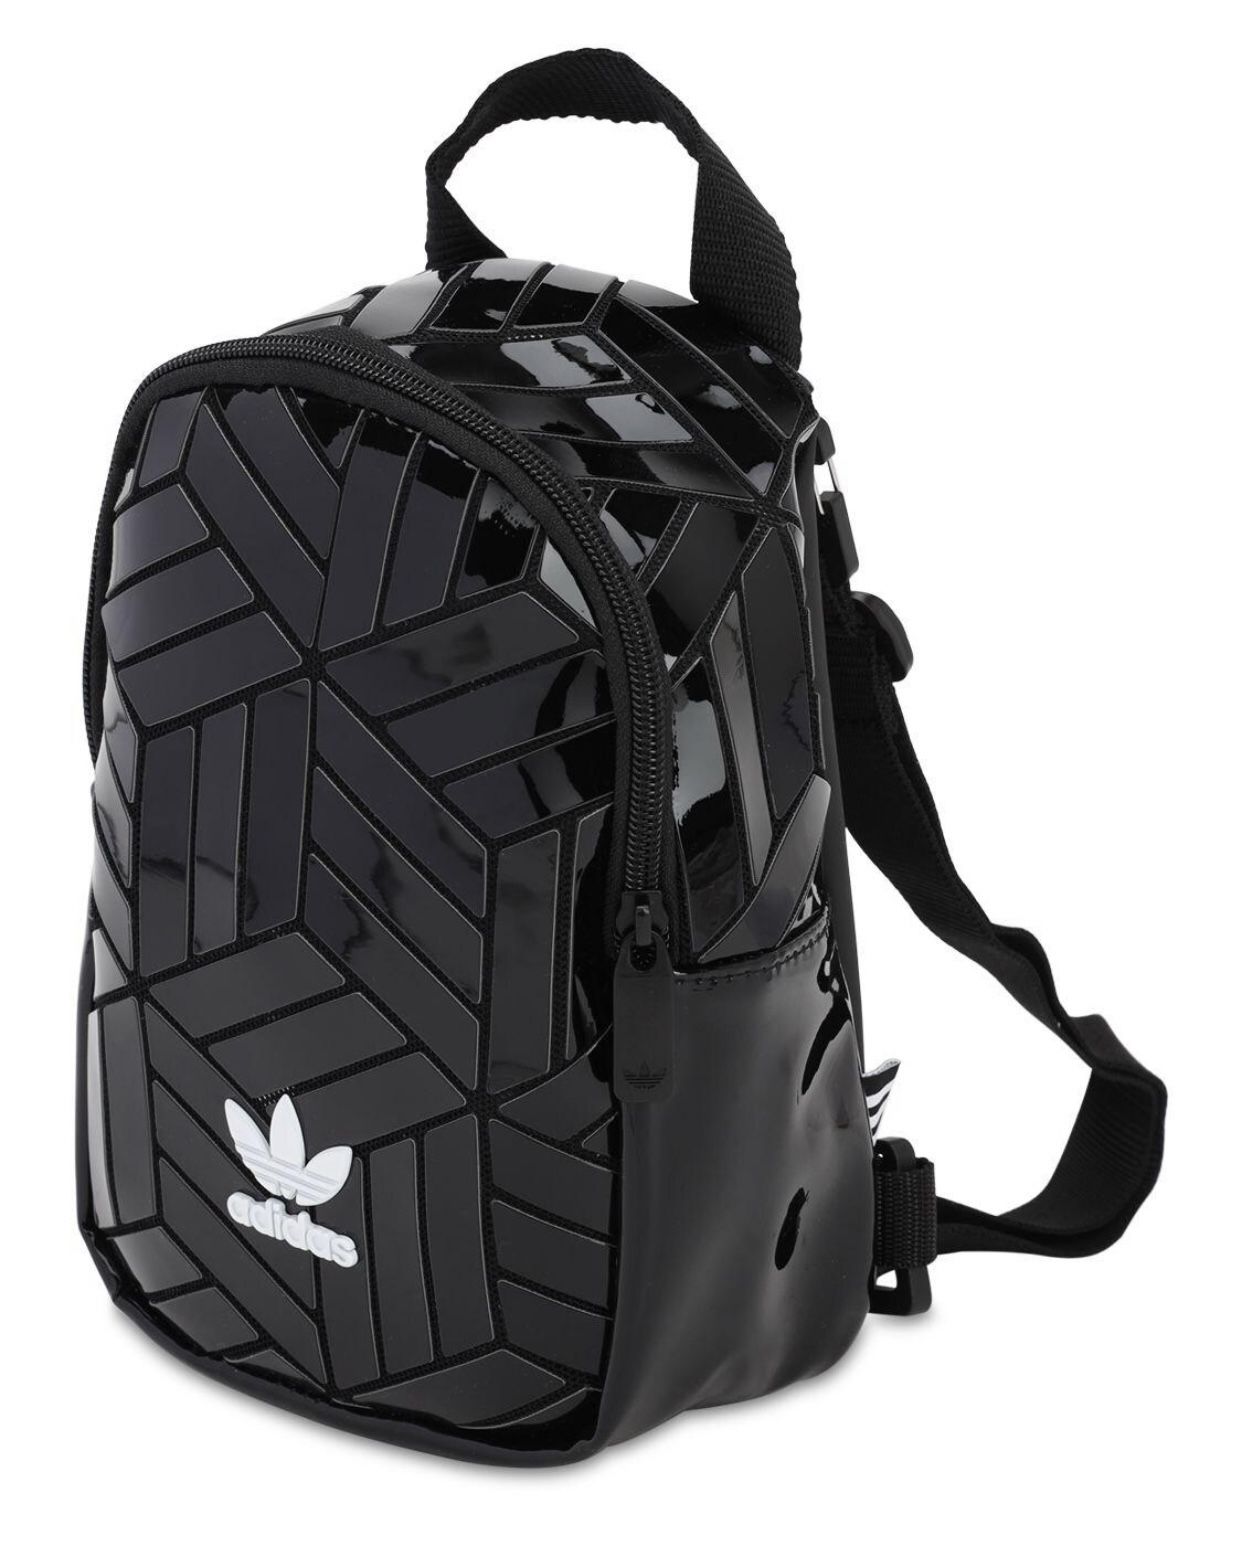 fort Udvinding Føderale adidas Originals Women's Black Mini Faux Patent Leather Backpack. Make an  offer! for Sale in New York, NY - OfferUp